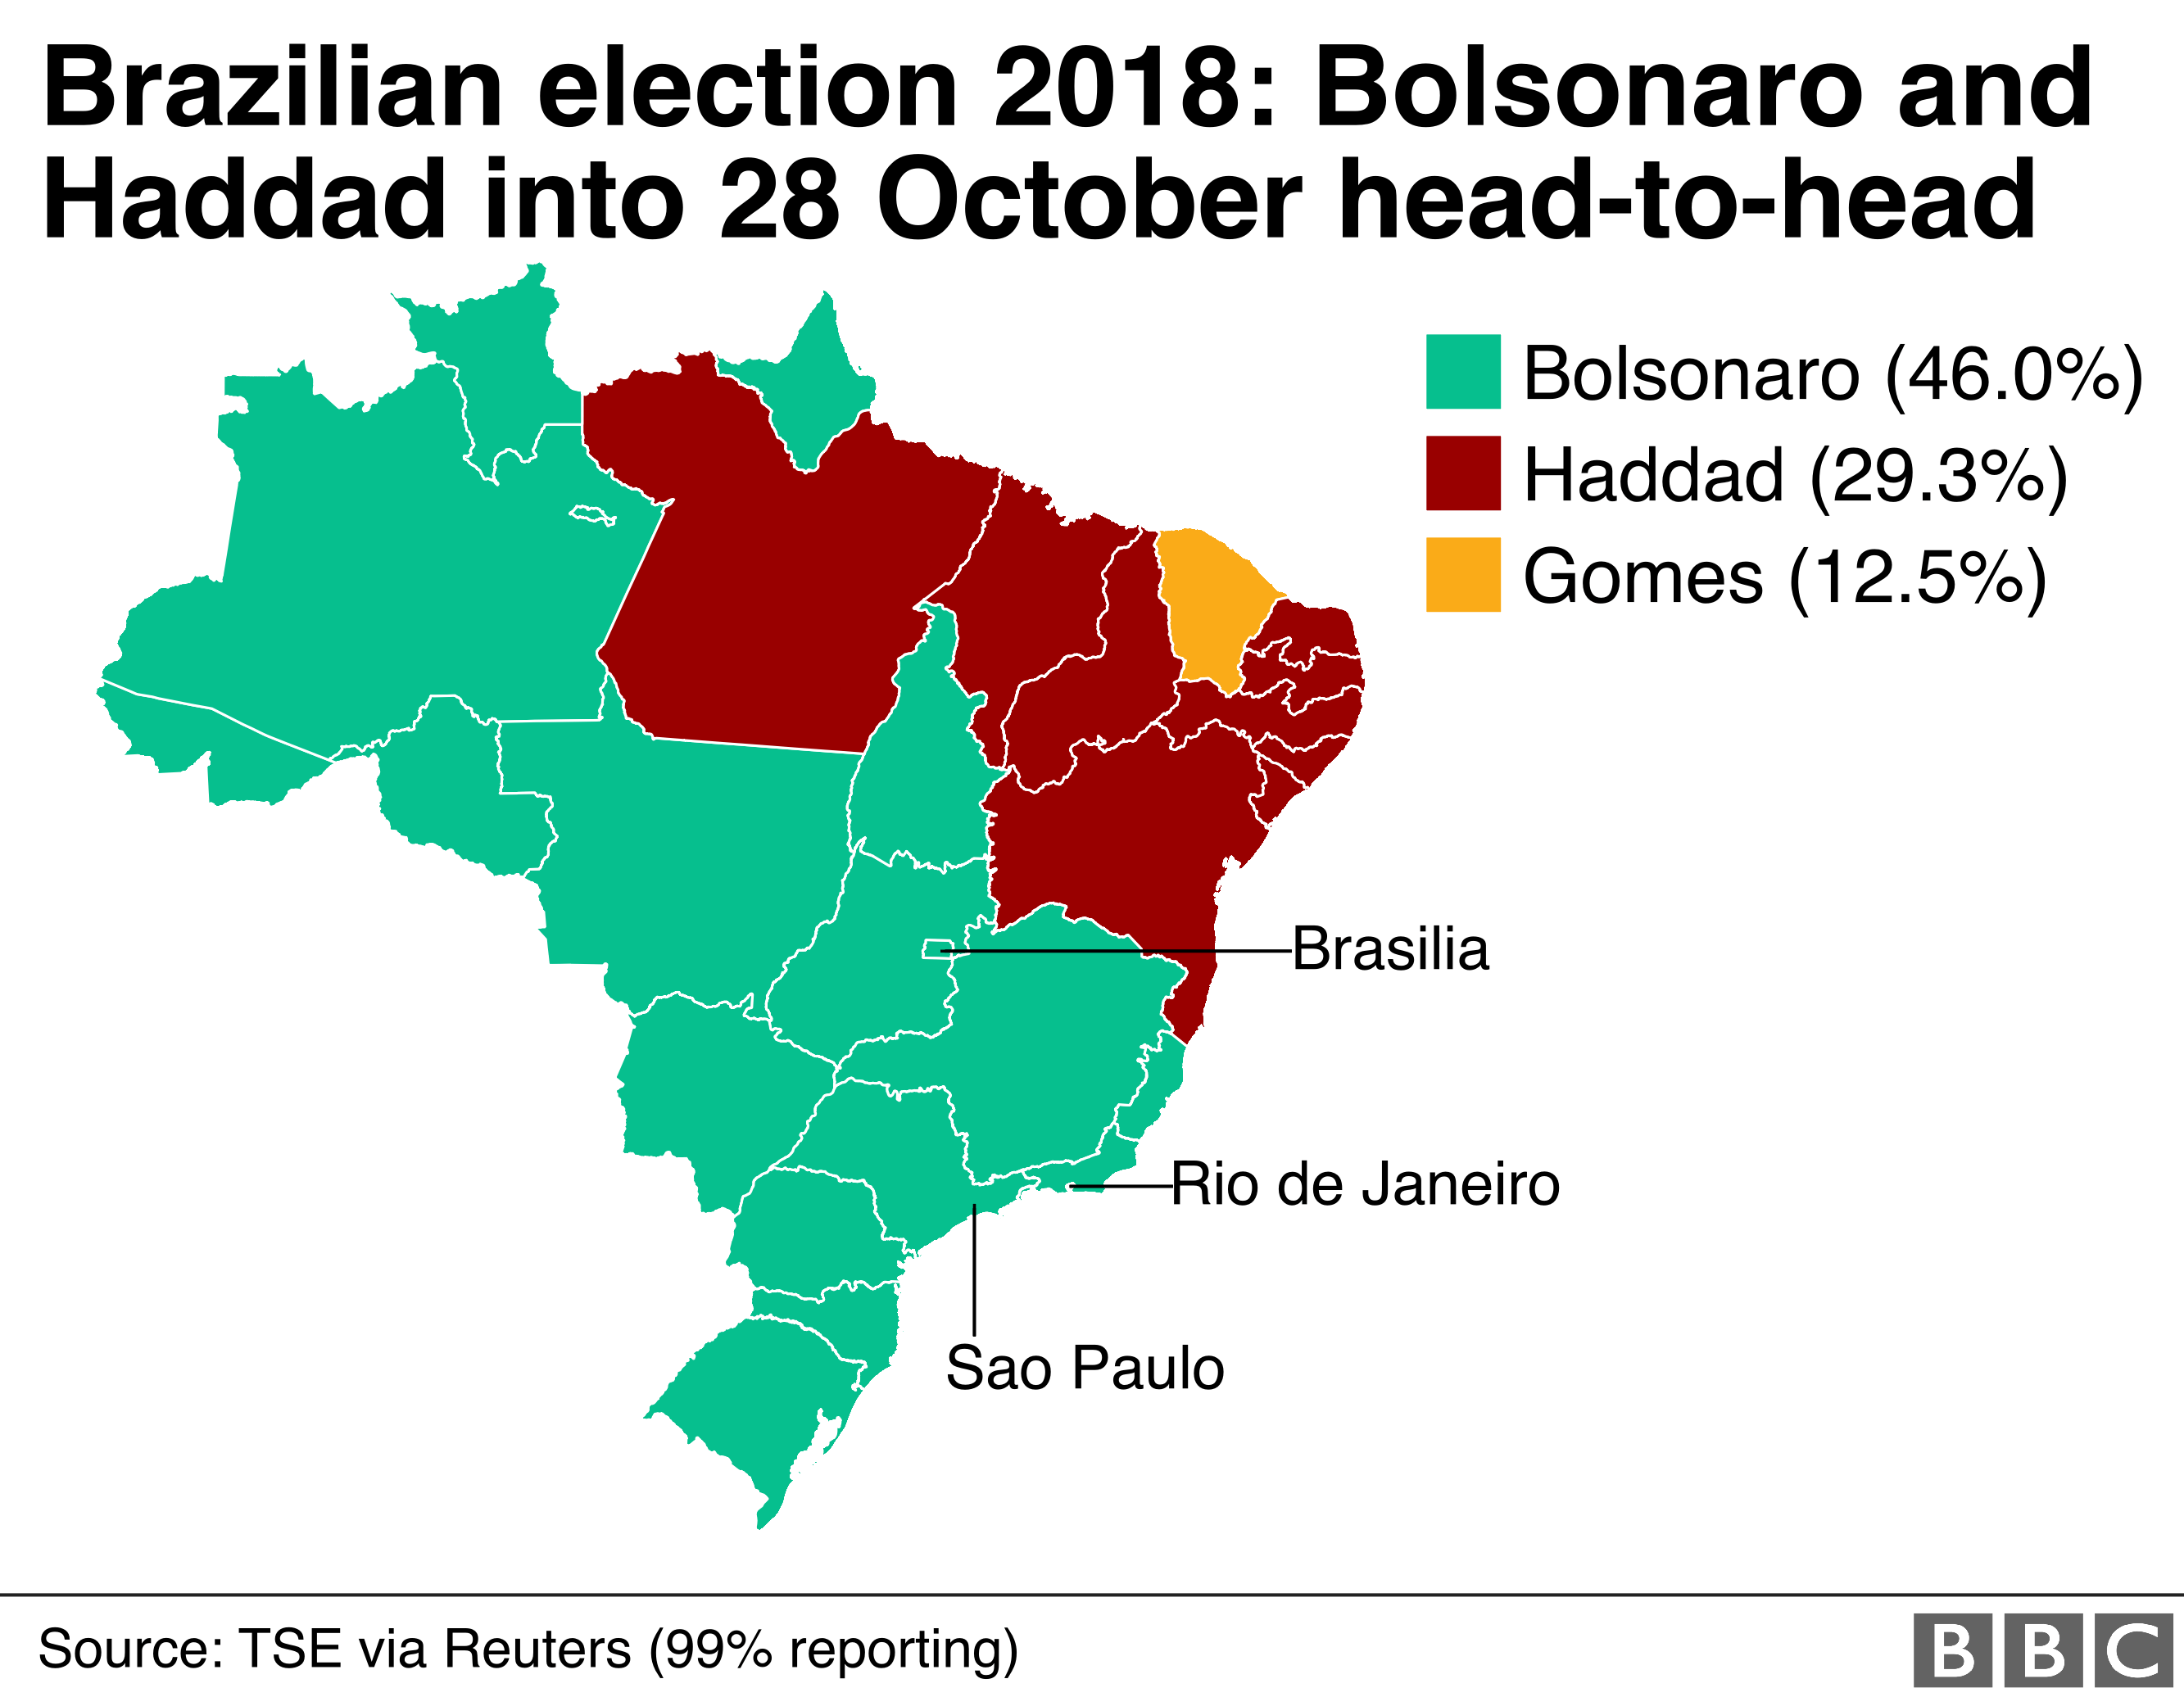 Haddad won in nine states in the north east of Brazil, while Bolsonaro dominated the rest of the country. Gomes also won his home state of Ceara